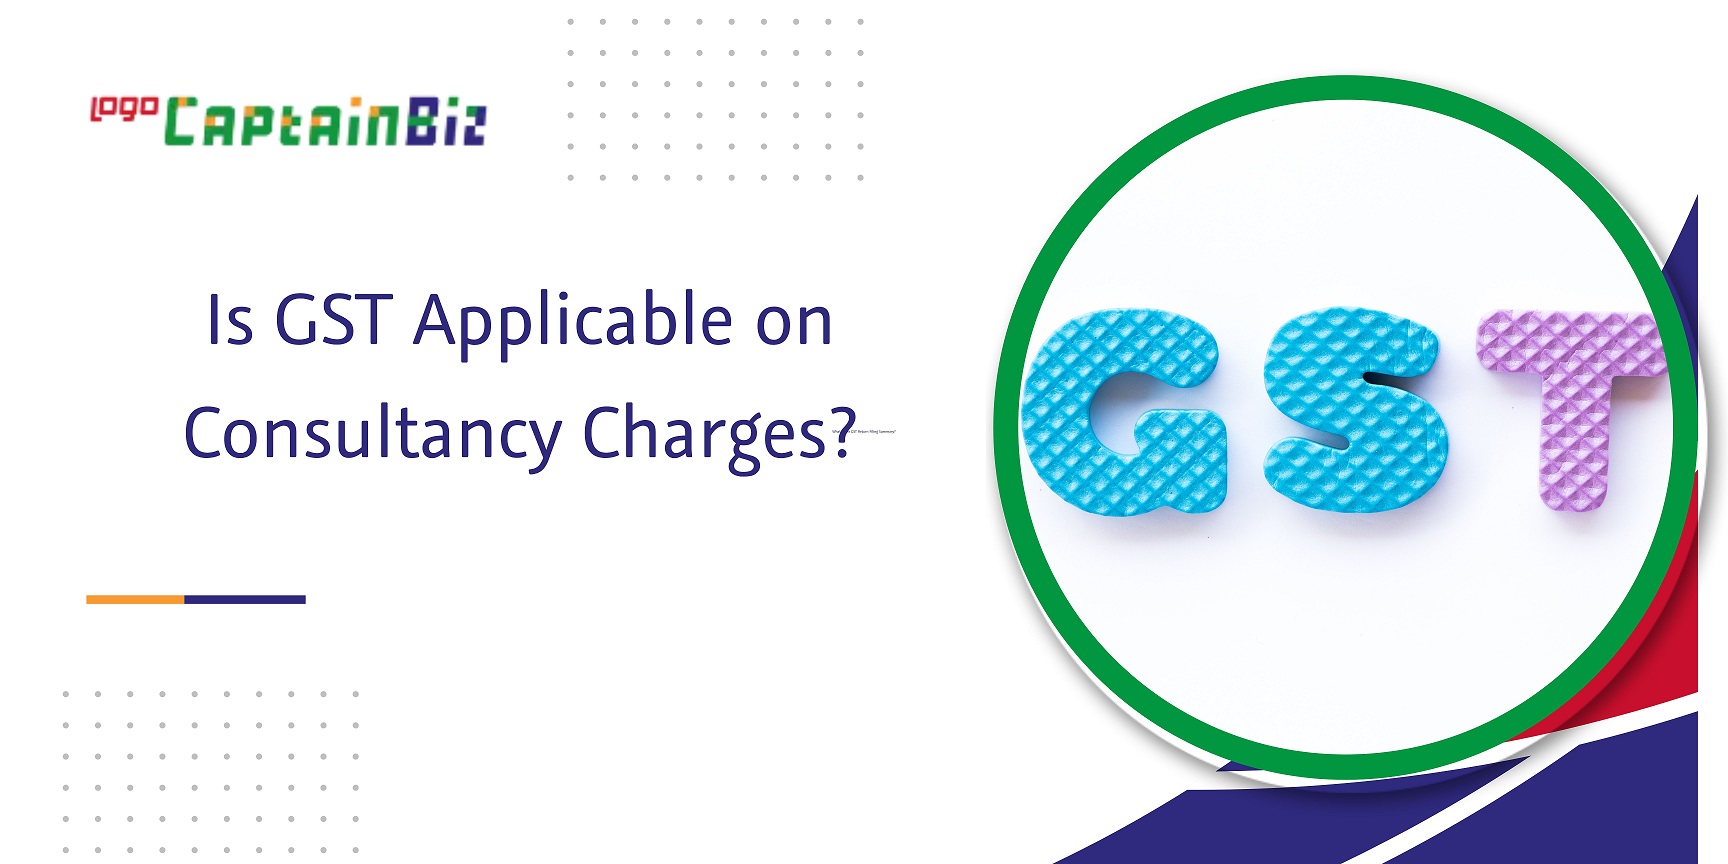 CaptainBiz: is gst applicable on consultancy charges